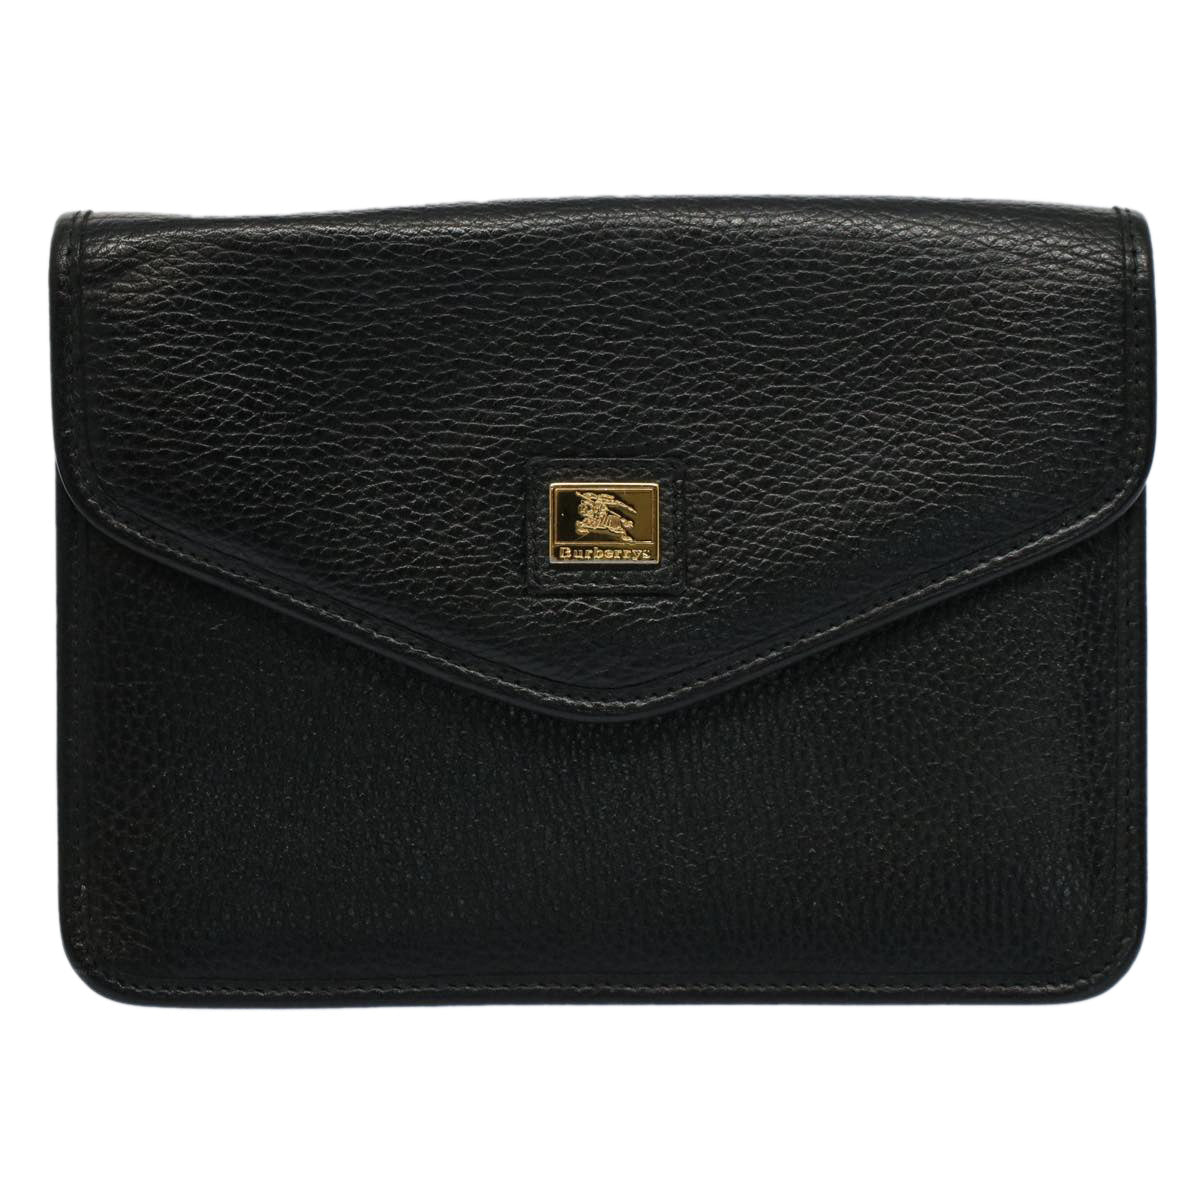 Burberrys Clutch Bag Leather Black Auth bs9049